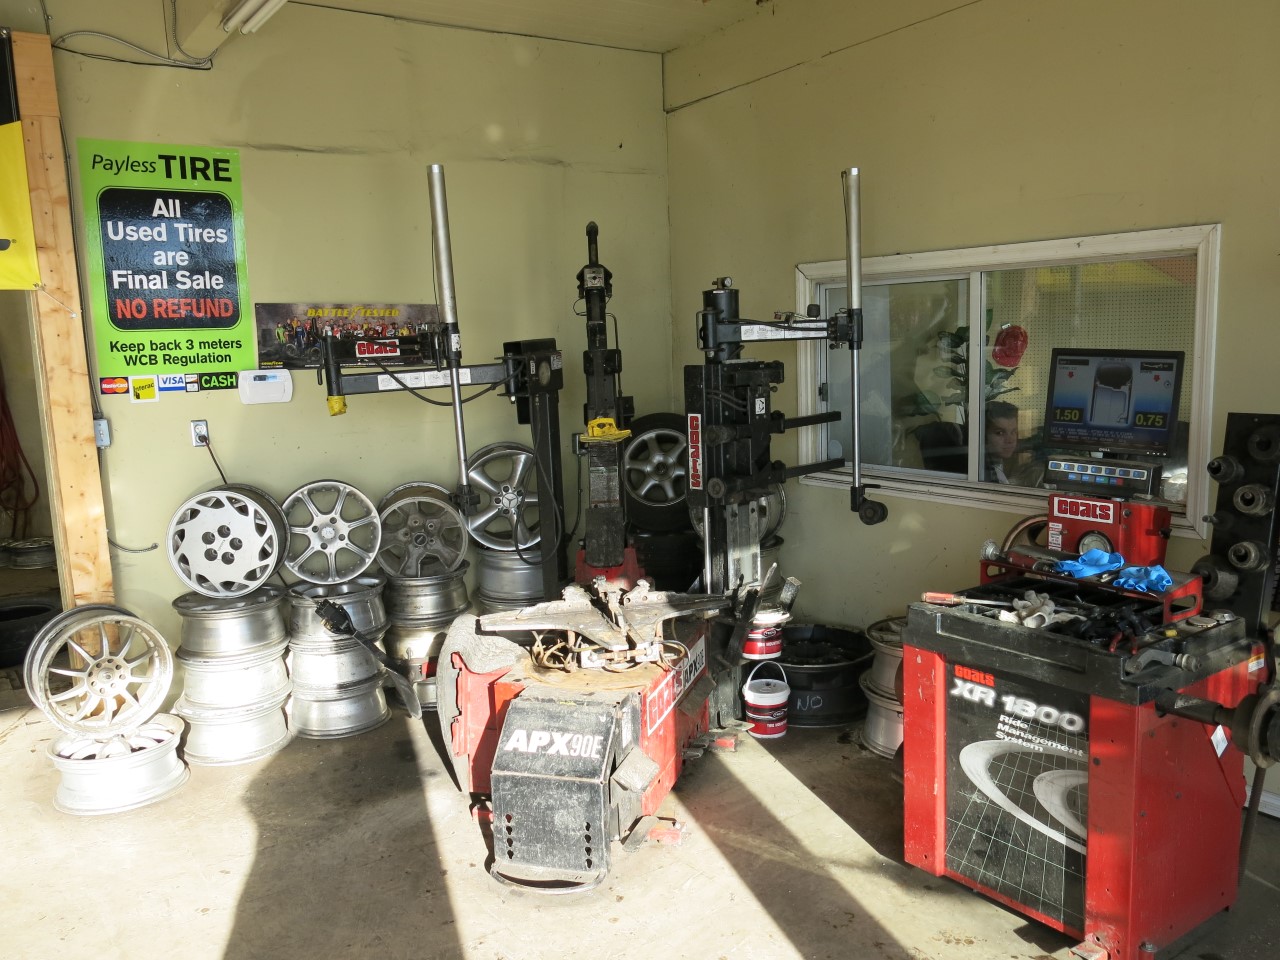 Our Coquitlam Tire Shop - Payless Tire